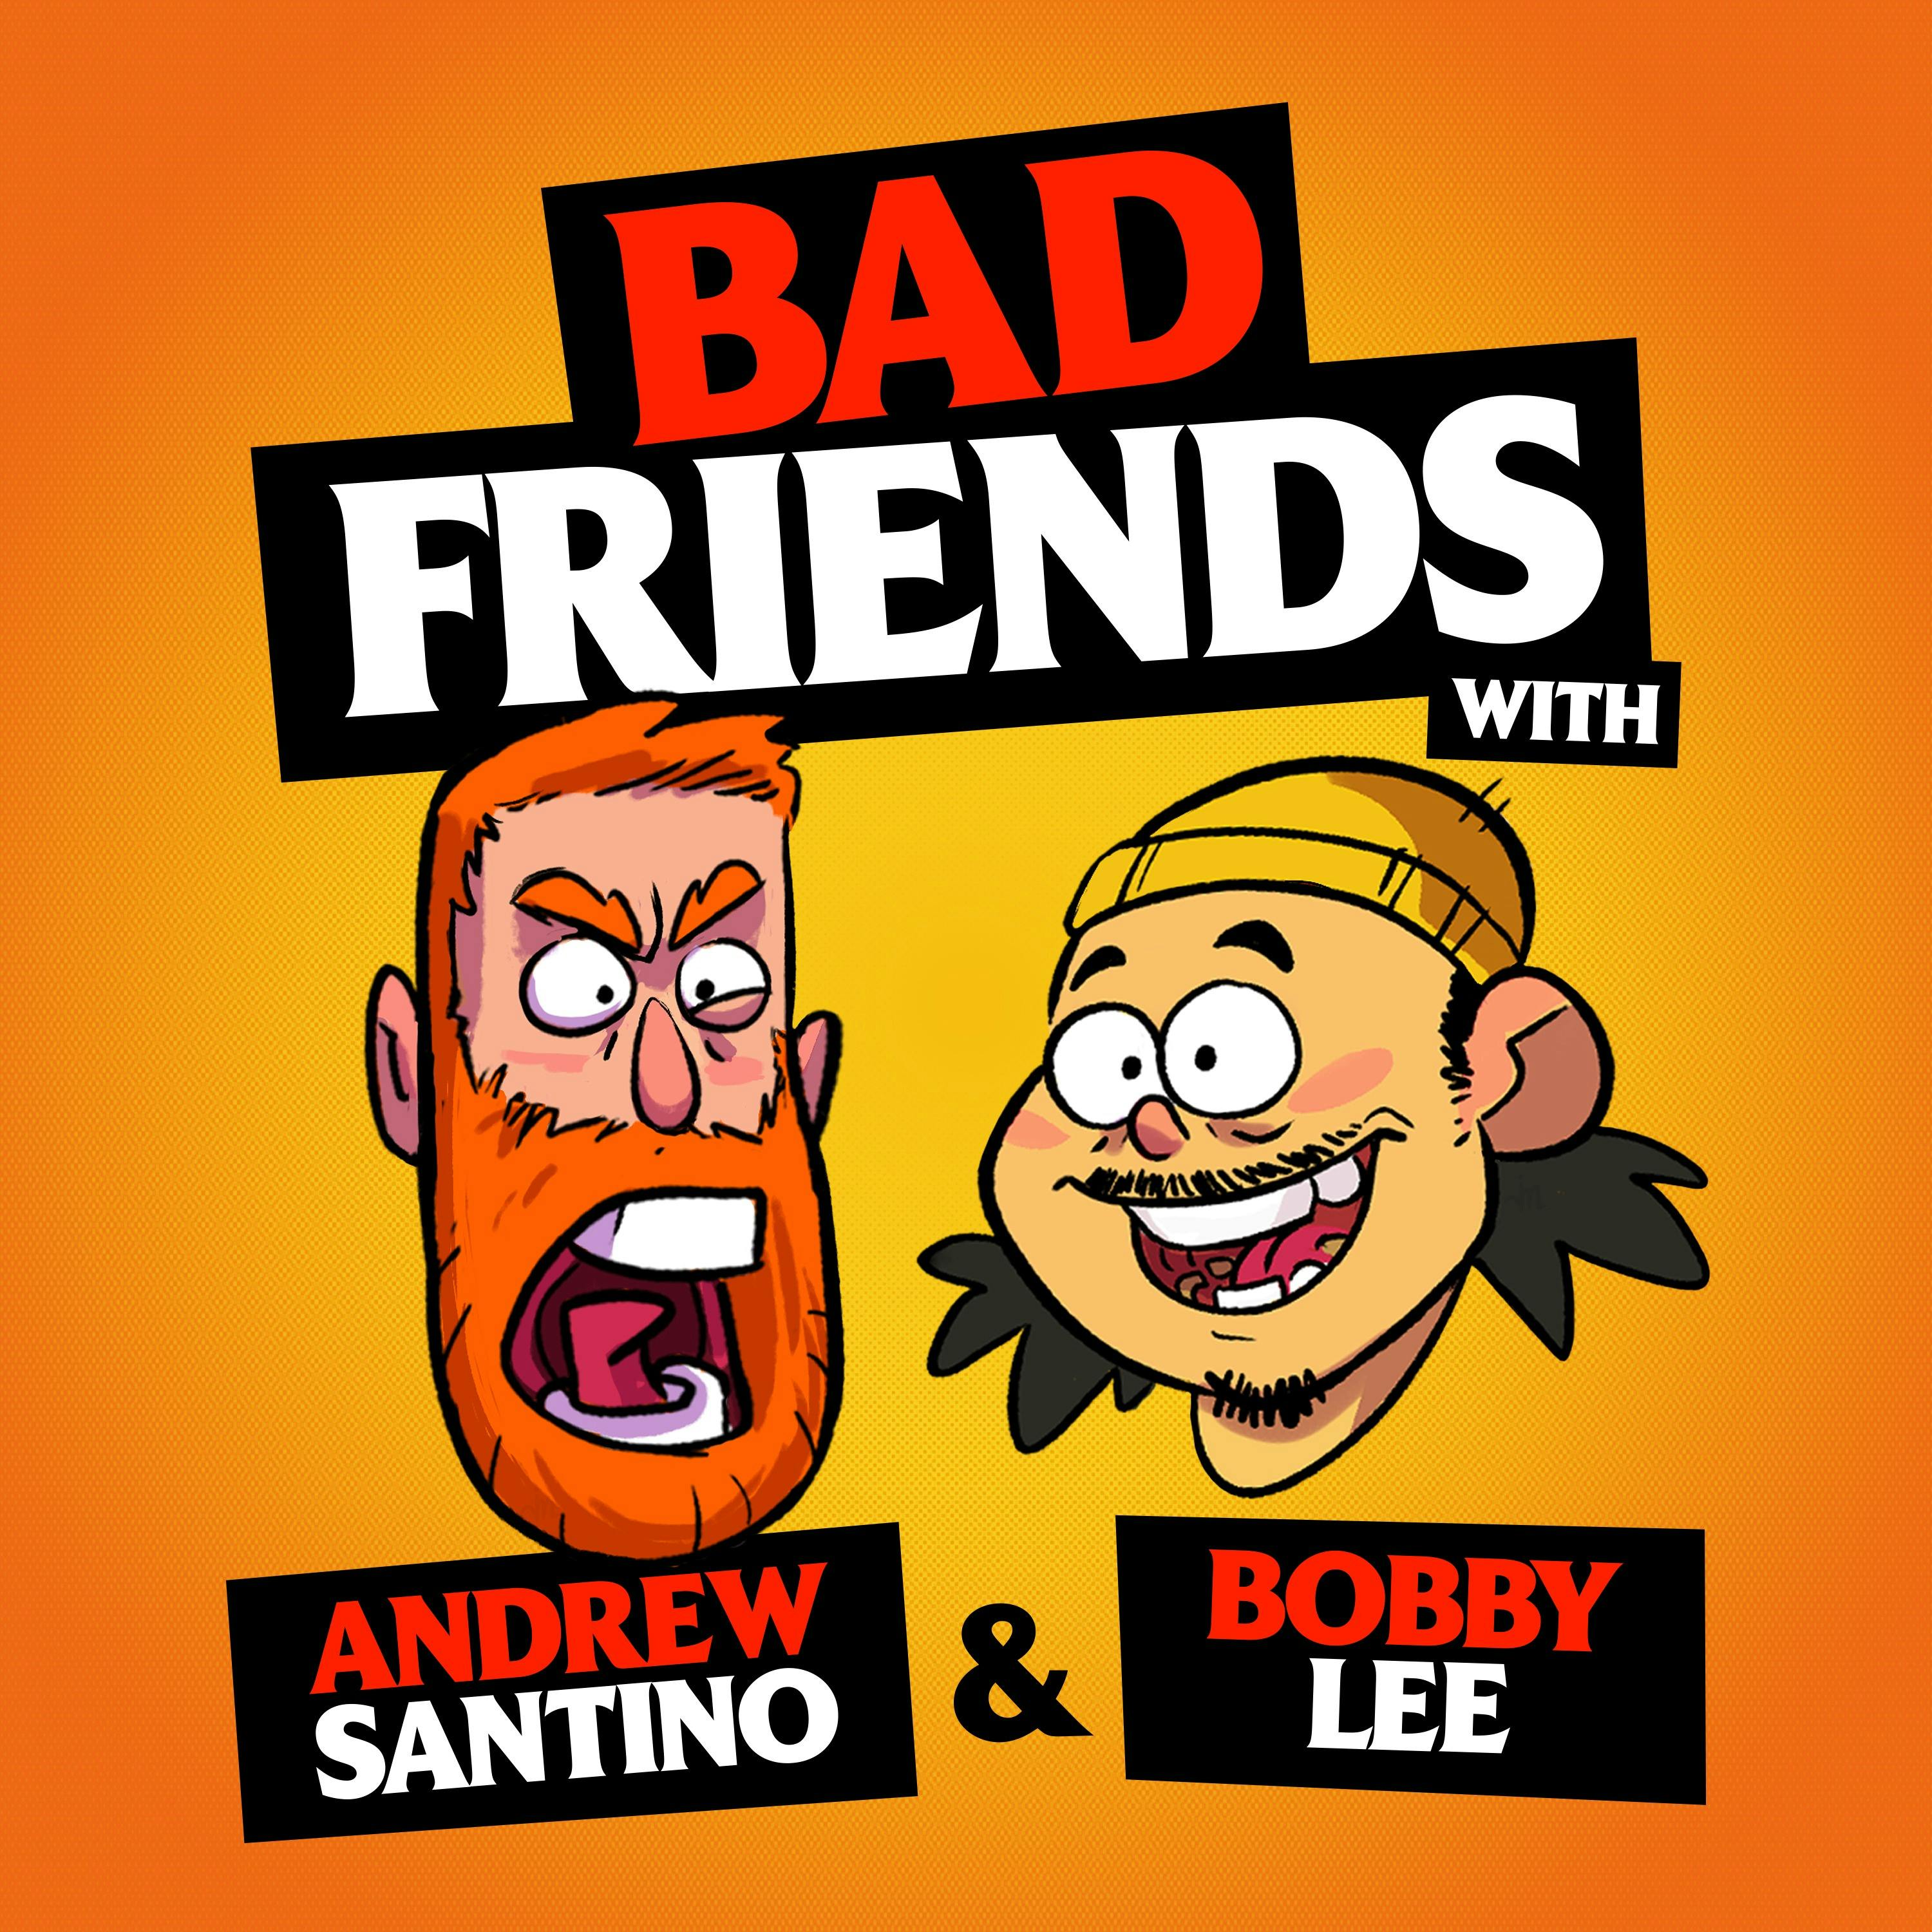 Andrew & Bobby Hide a Body by Andrew Santino and Bobby Lee